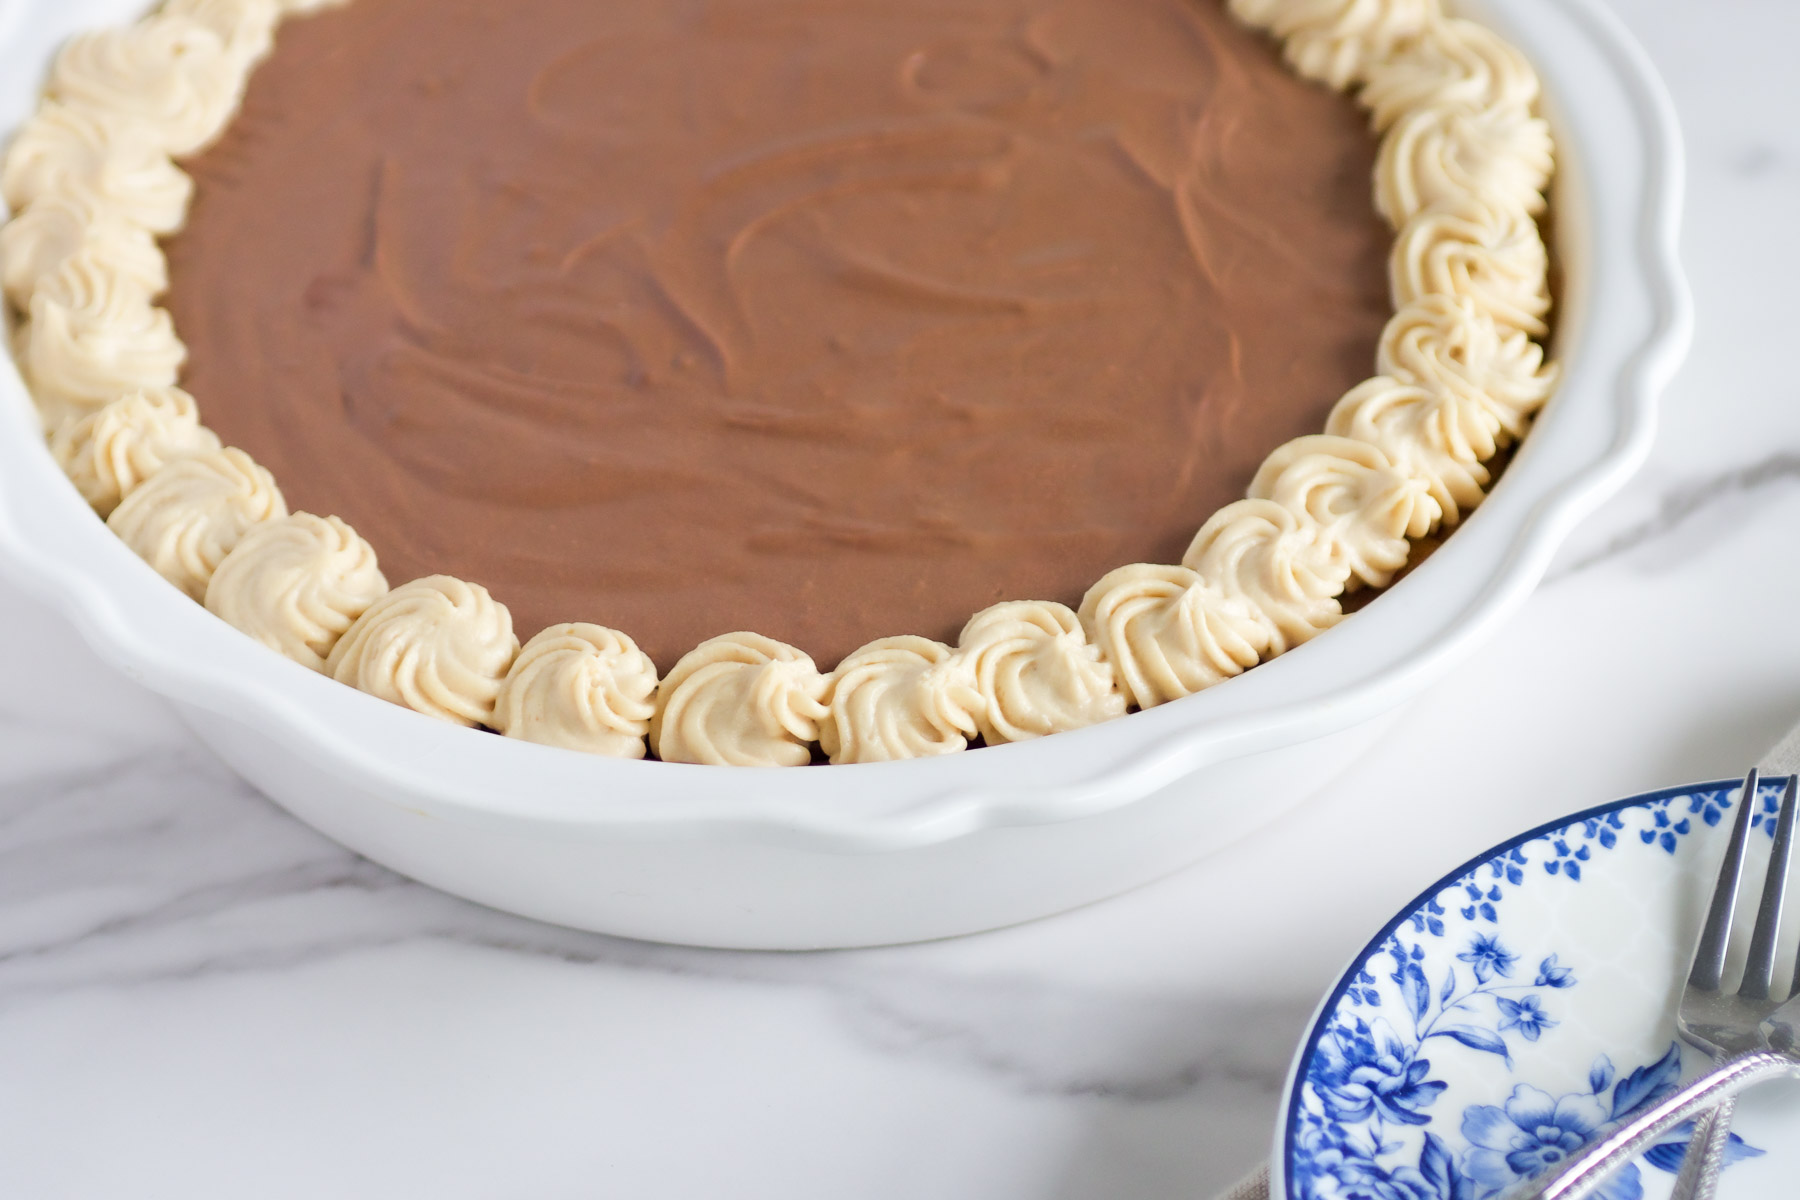 peanut butter chocolate pie in a white ceramic pie plate.  two forks a ble and white plate.